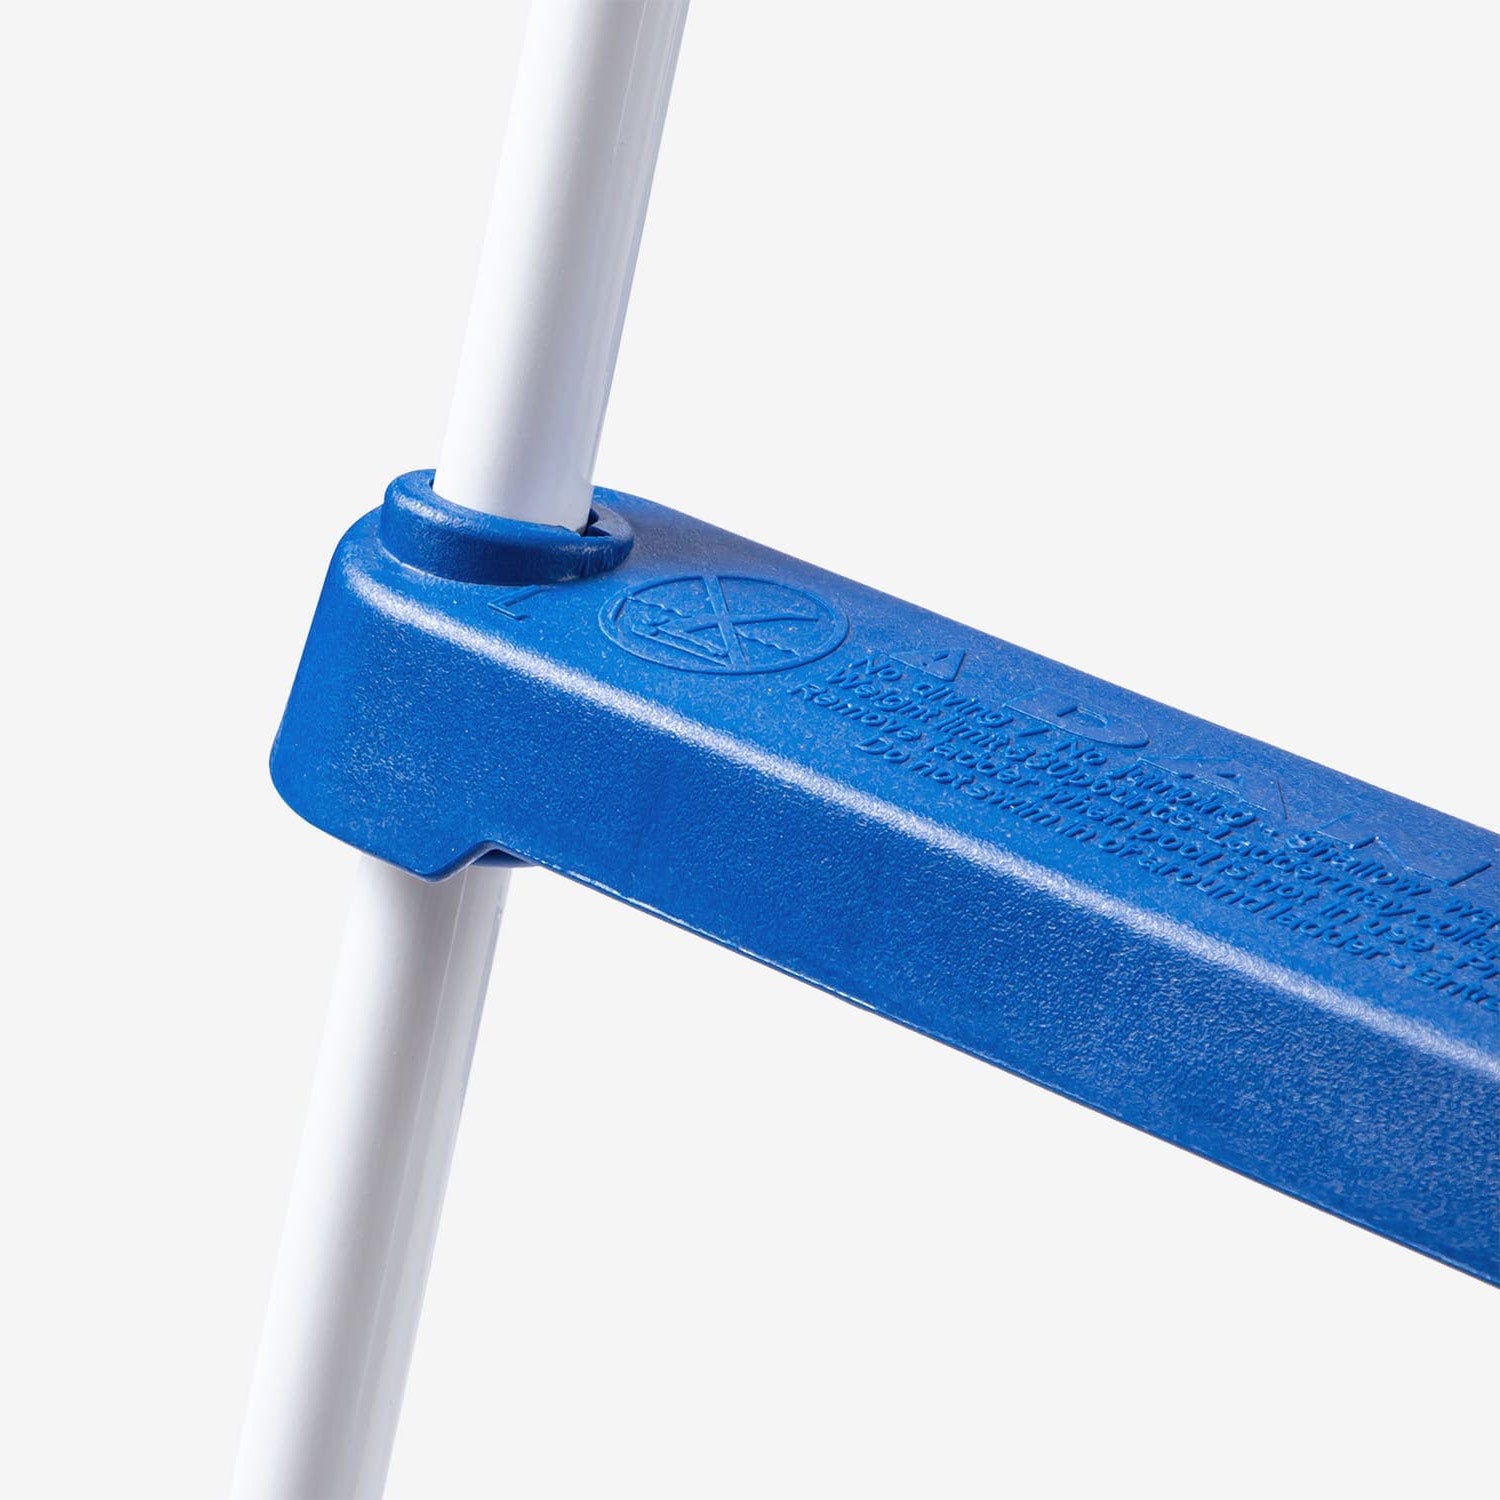 Funsicle 48" SureStep Ladder close up view